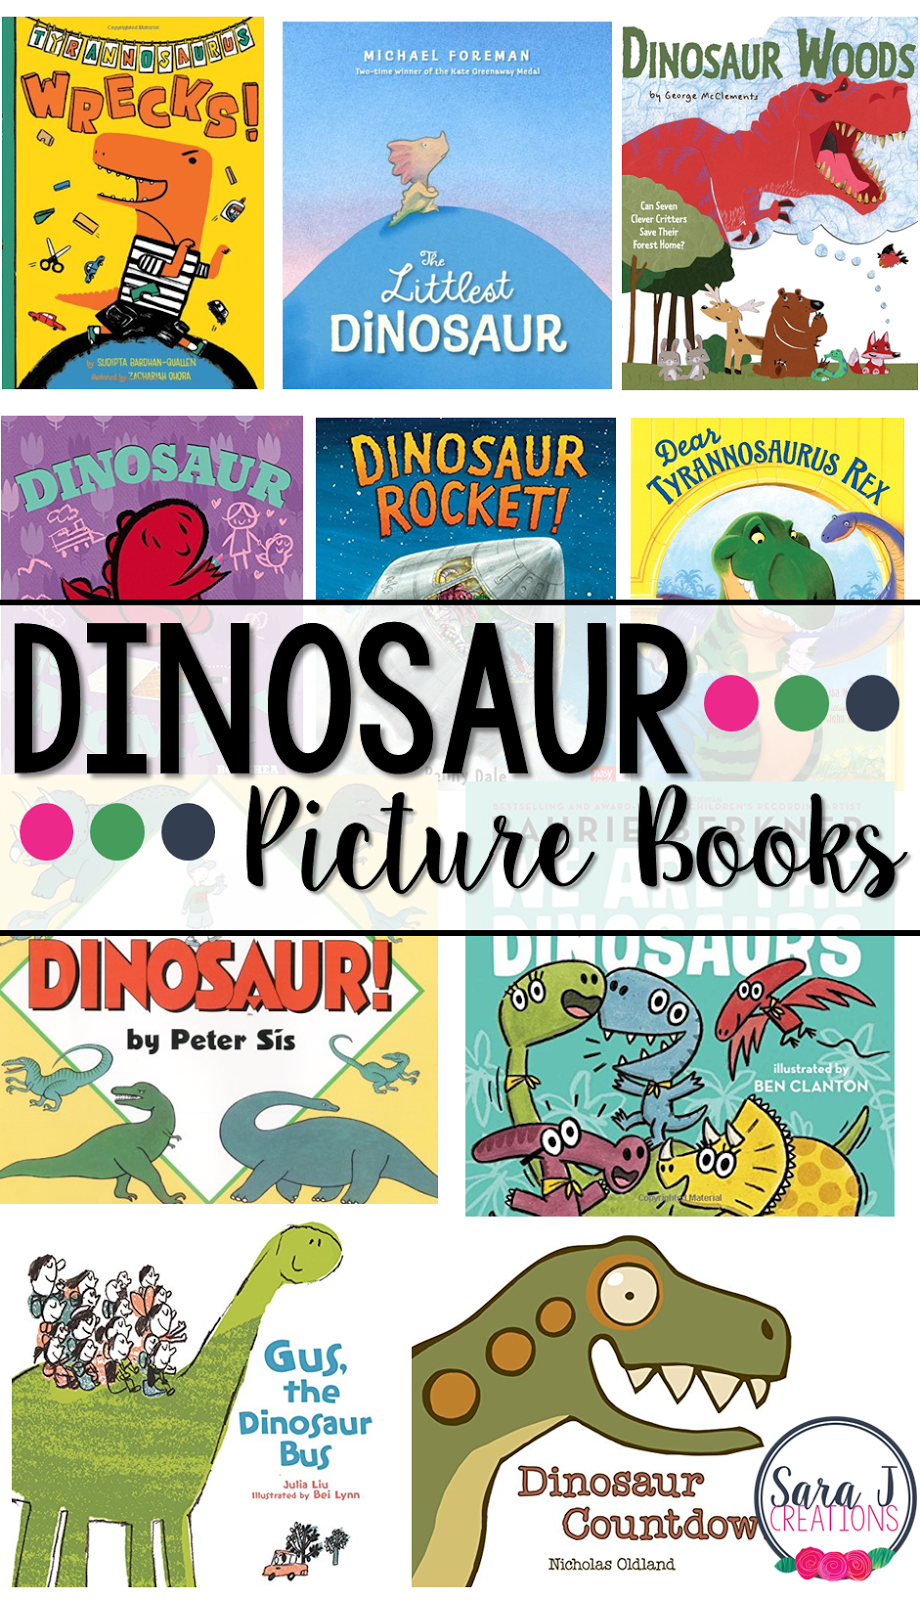 10 Dinosaur books your kids will love. Have you read these picture books?